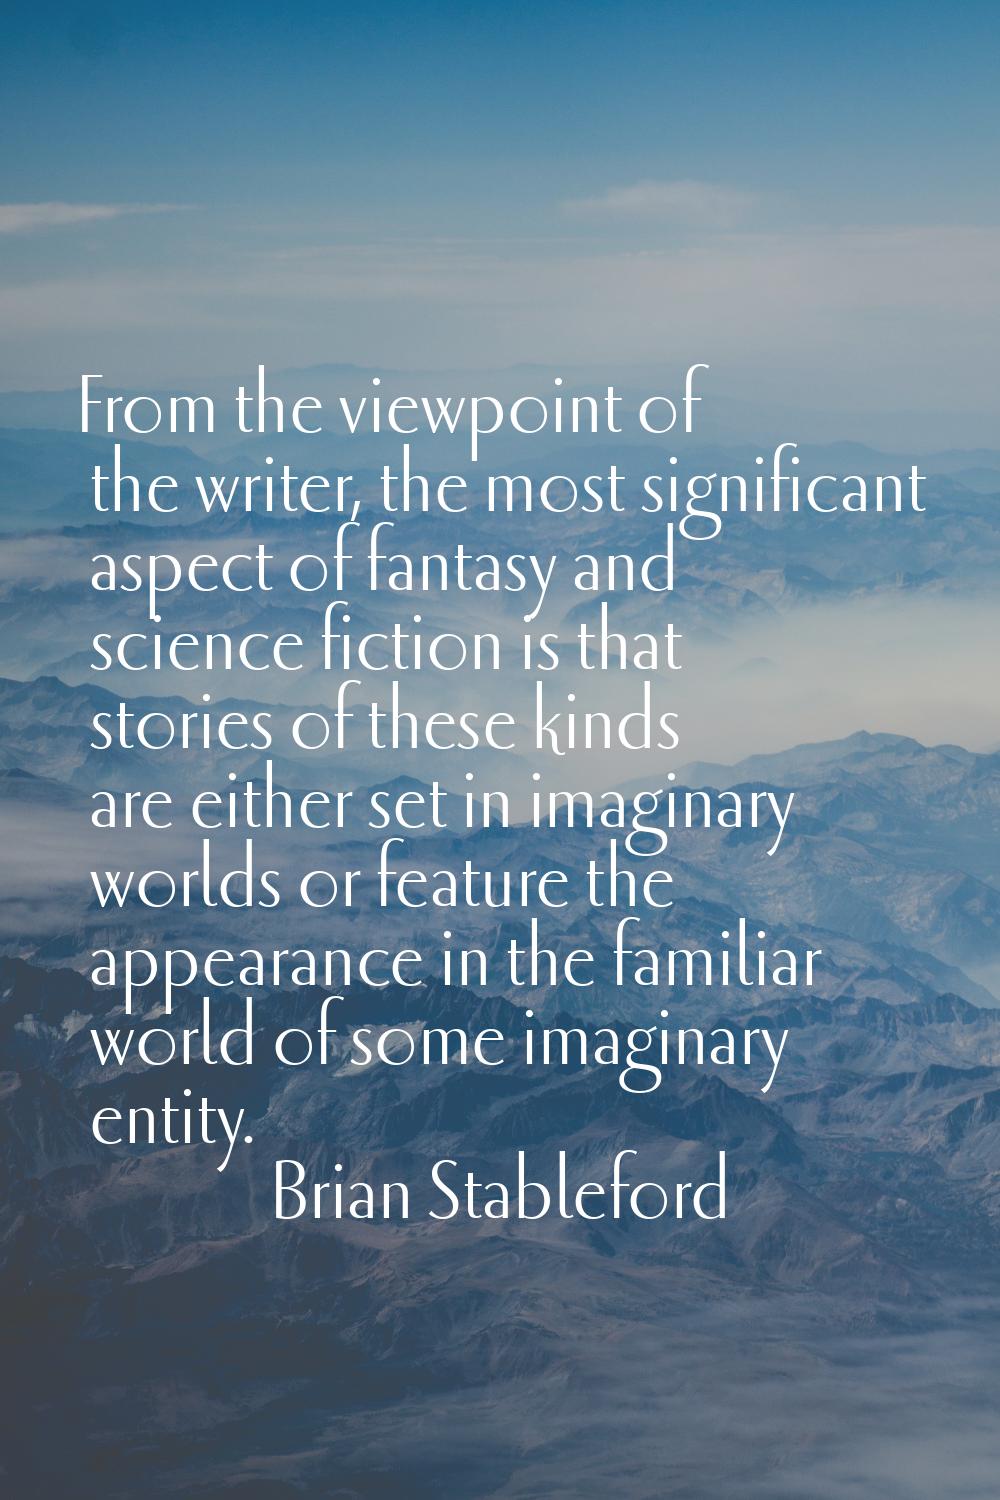 From the viewpoint of the writer, the most significant aspect of fantasy and science fiction is tha